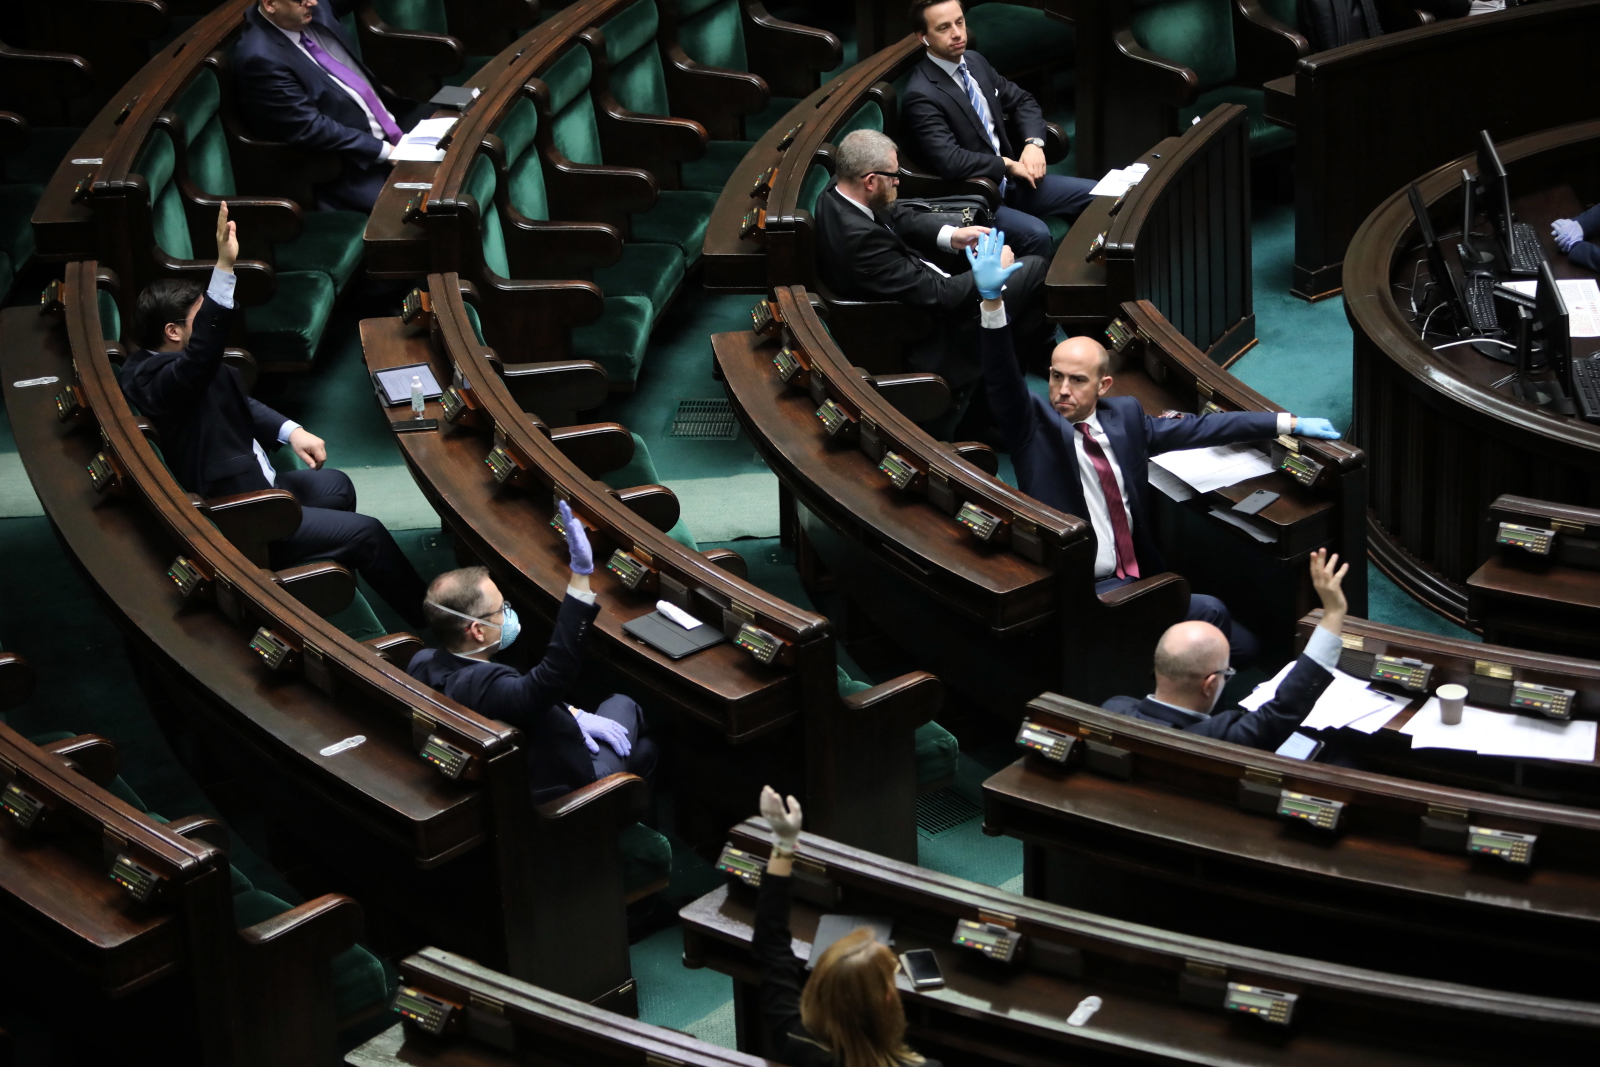 Polish MPs during a vote in parliament on Monday evening